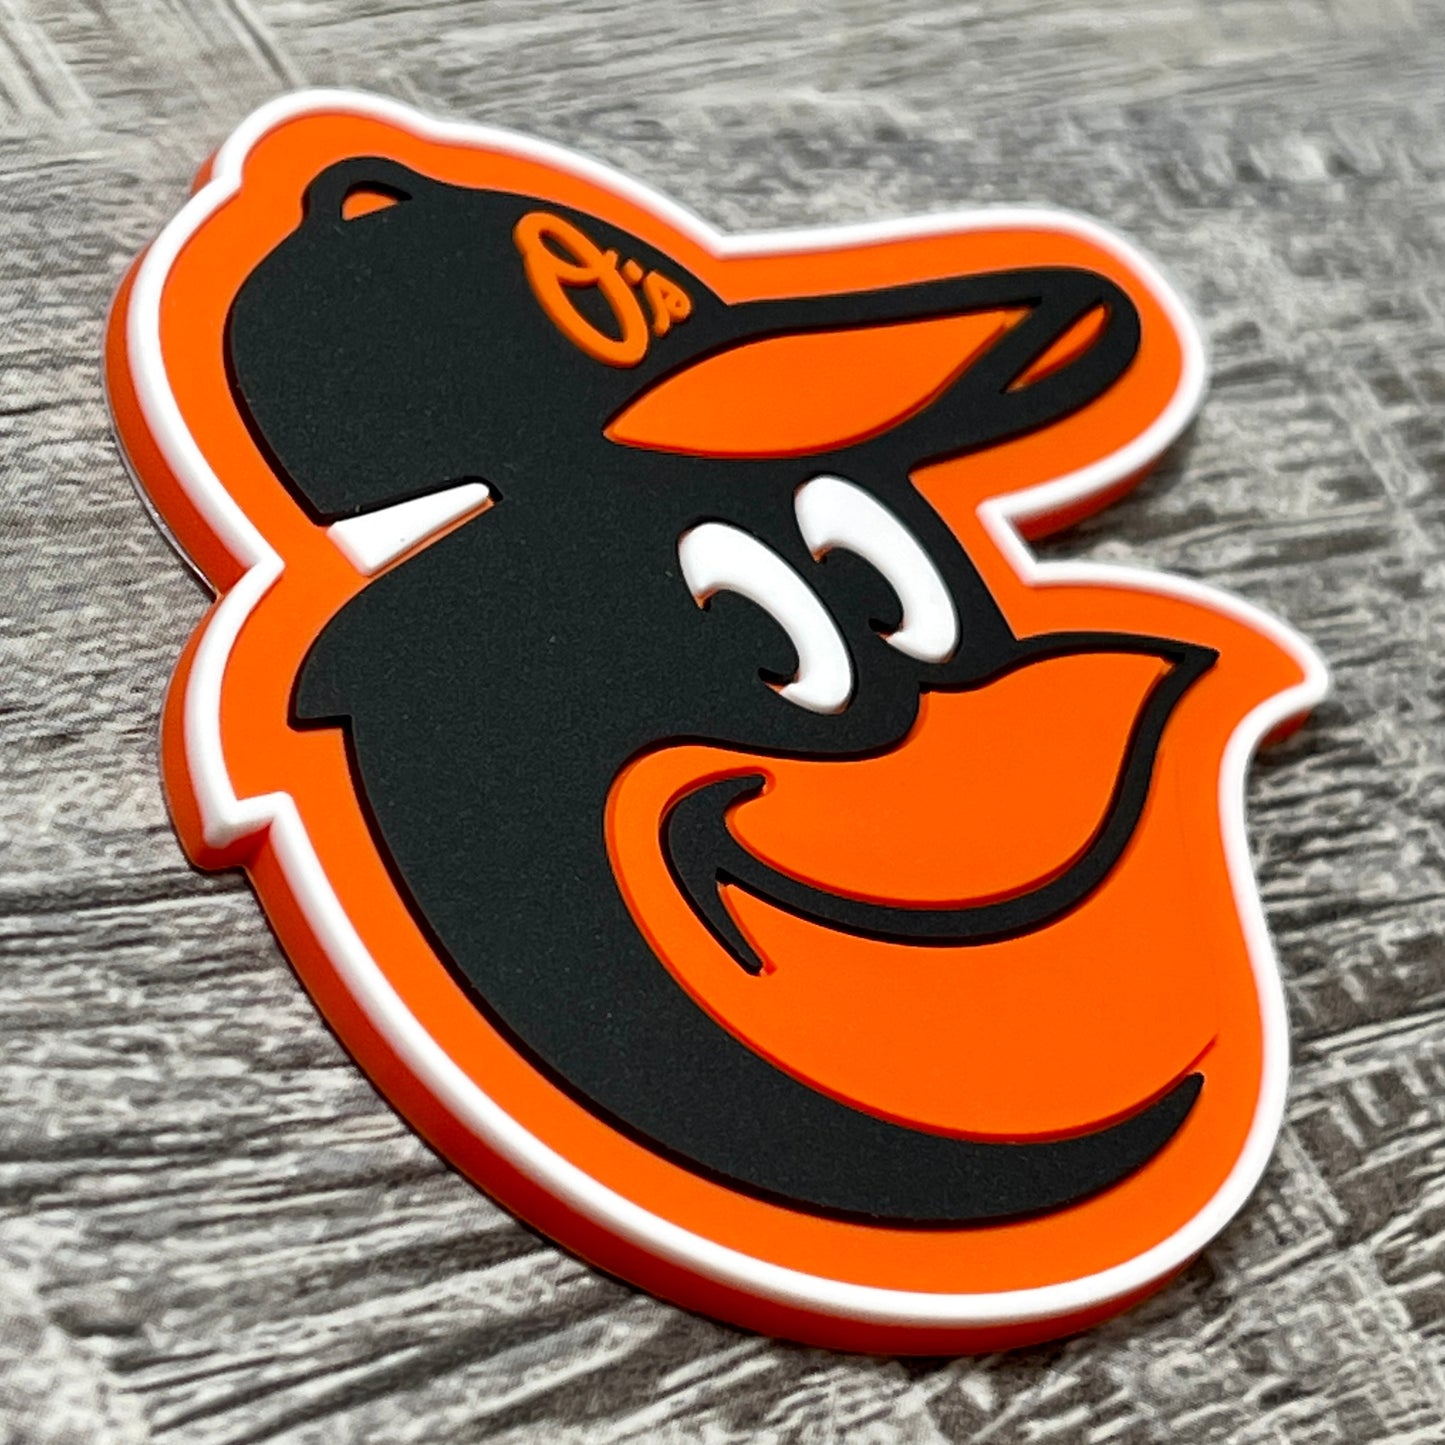 Baltimore Orioles 3D Classic Rope Hat- Charcoal